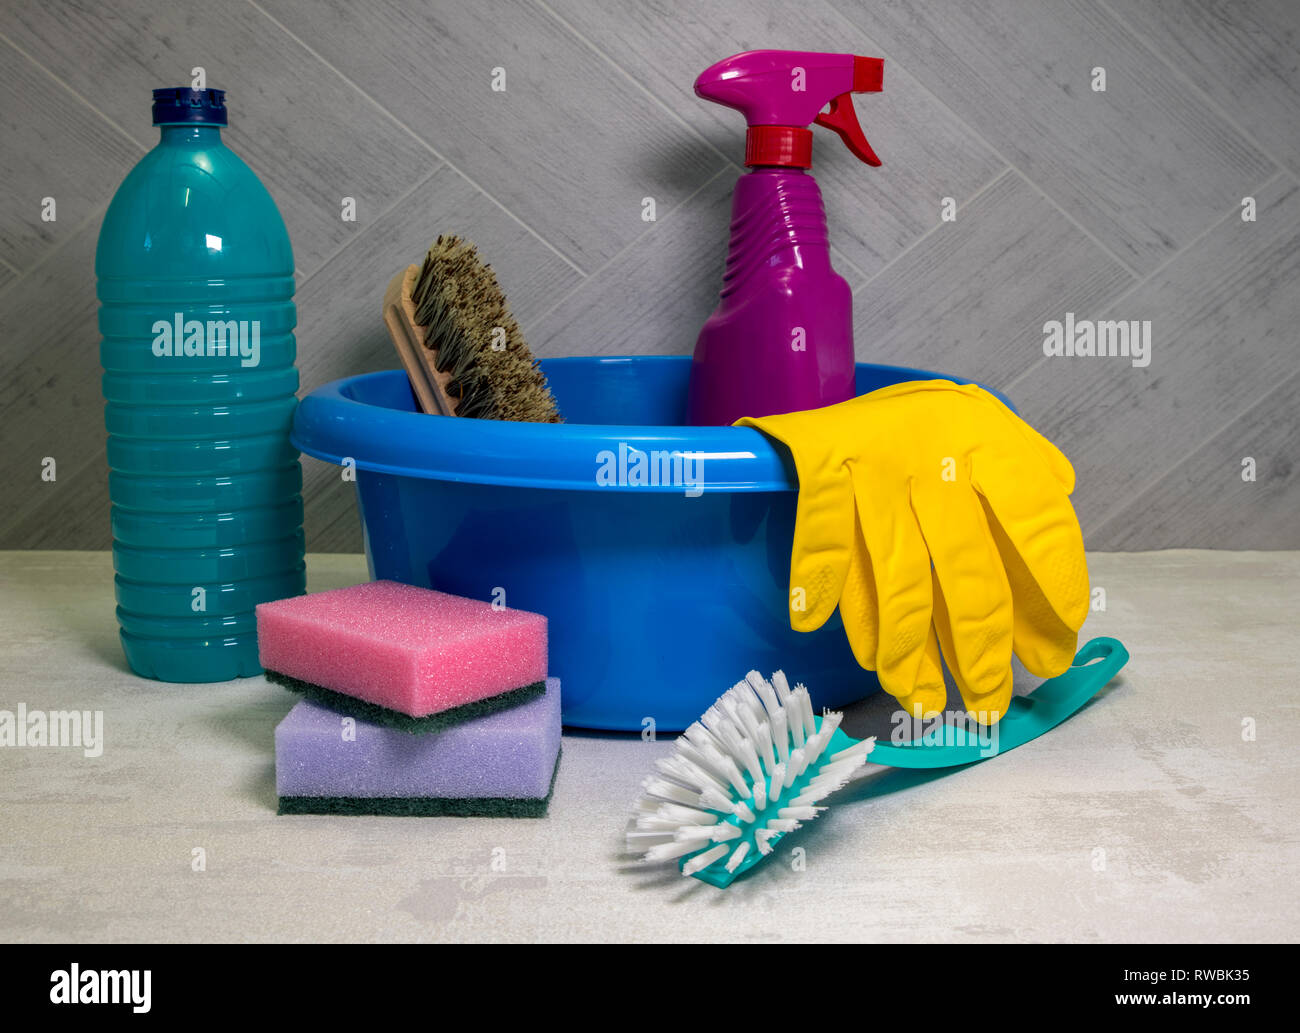 https://c8.alamy.com/comp/RWBK35/blue-washing-up-dish-with-cleaning-tools-and-detergents-as-degreaser-and-a-brush-with-wipes-RWBK35.jpg